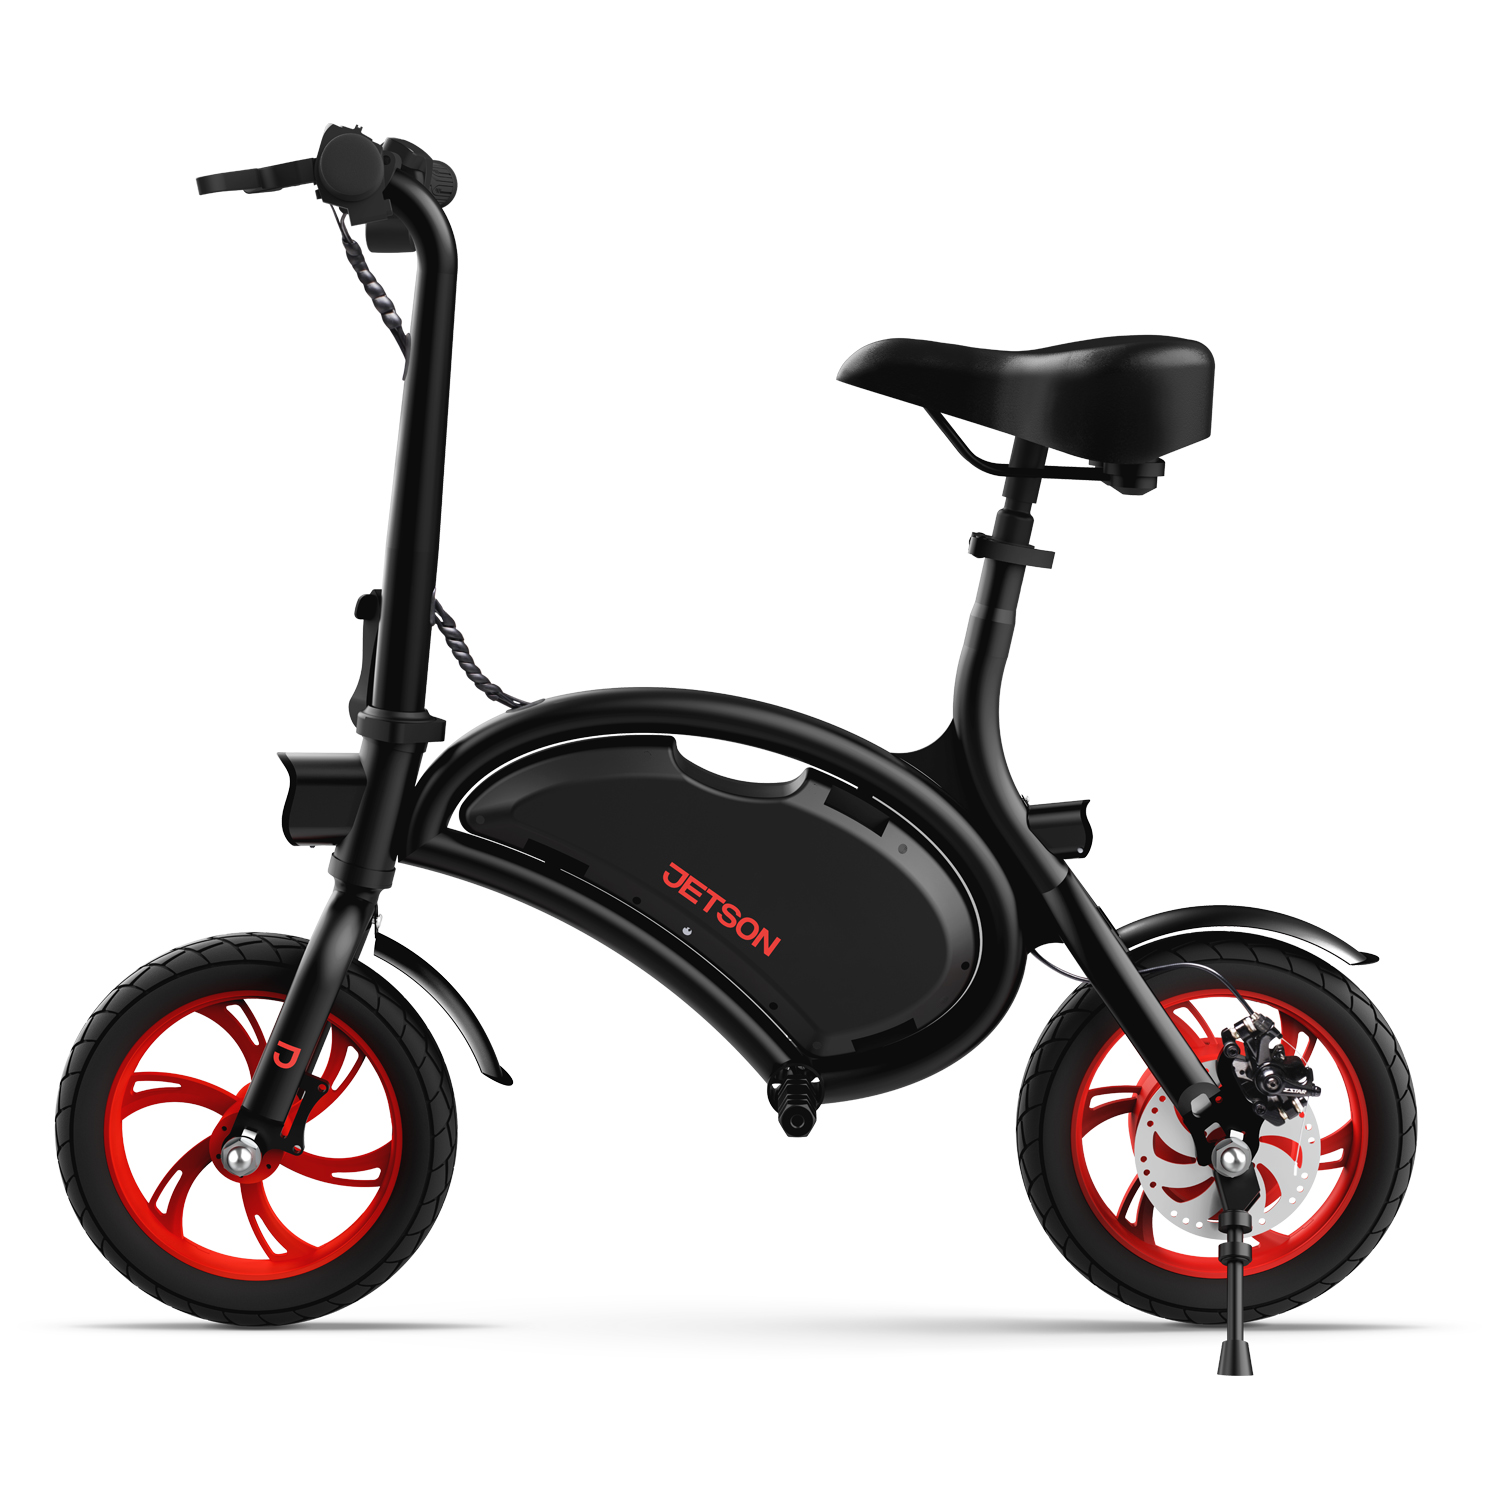 Jetson Bolt Folding Electric Ride-On with Twist Throttle, Cruise Control, Up to 15.5 mph, Black - image 1 of 17